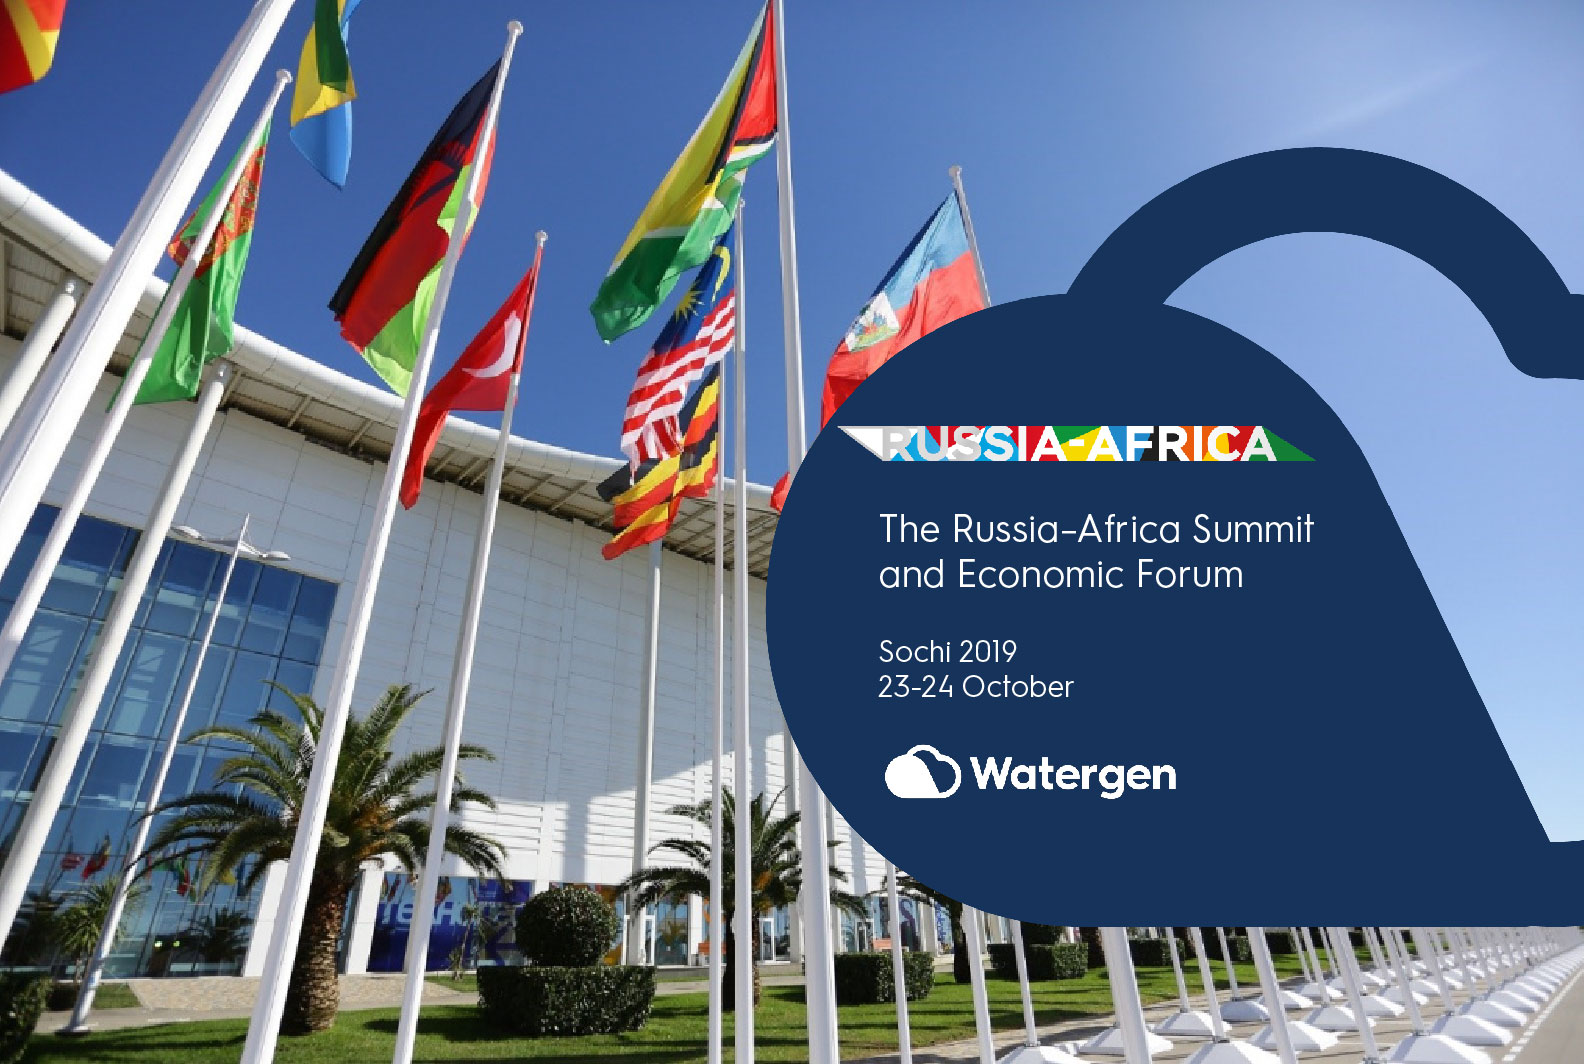 Watergen at the Russia-Africa Summit and Economic Forum